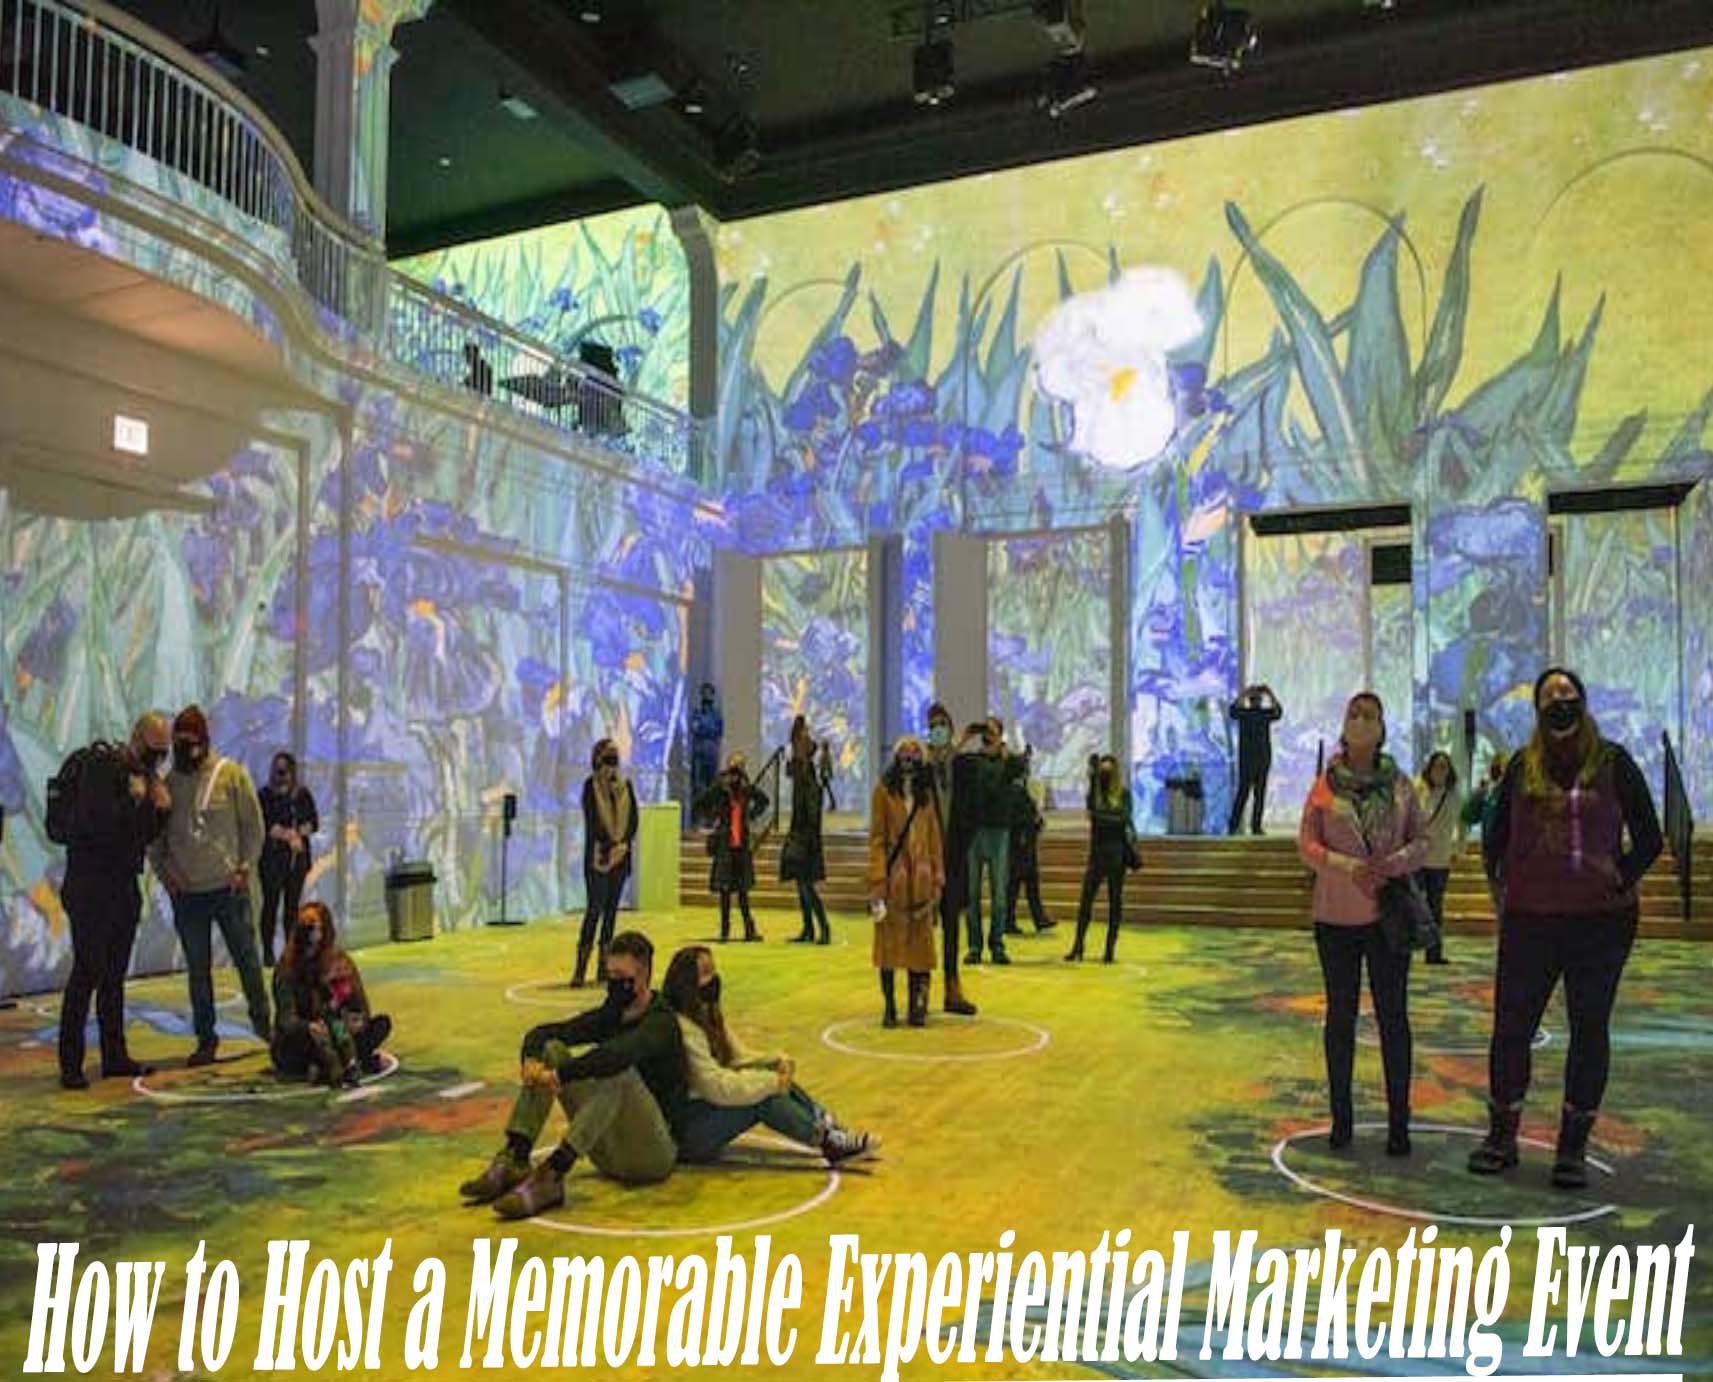 How to Host a Memorable Experiential Marketing Event